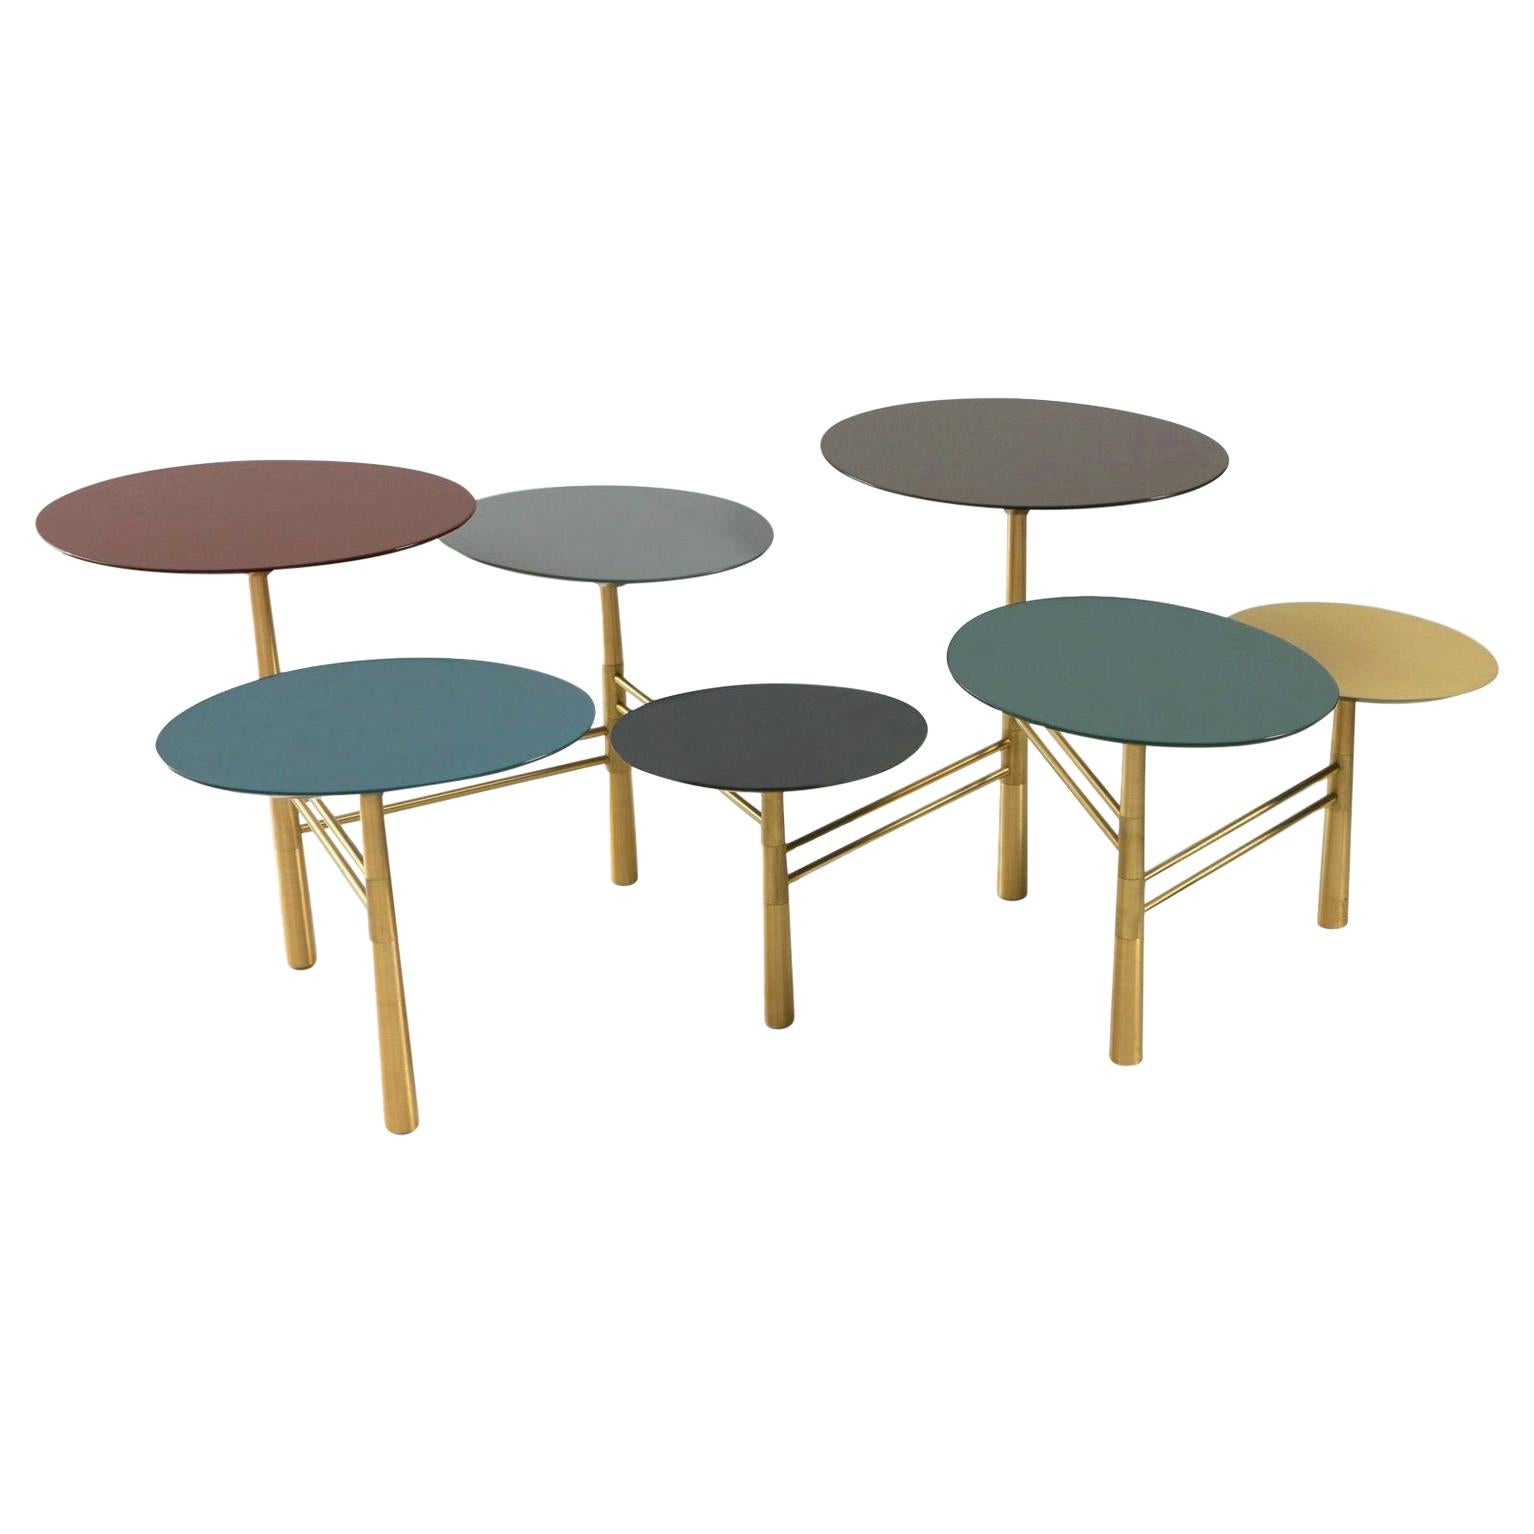 Tapis d'Orient Pebble Table by Nada Debs, Contemporary Coffee